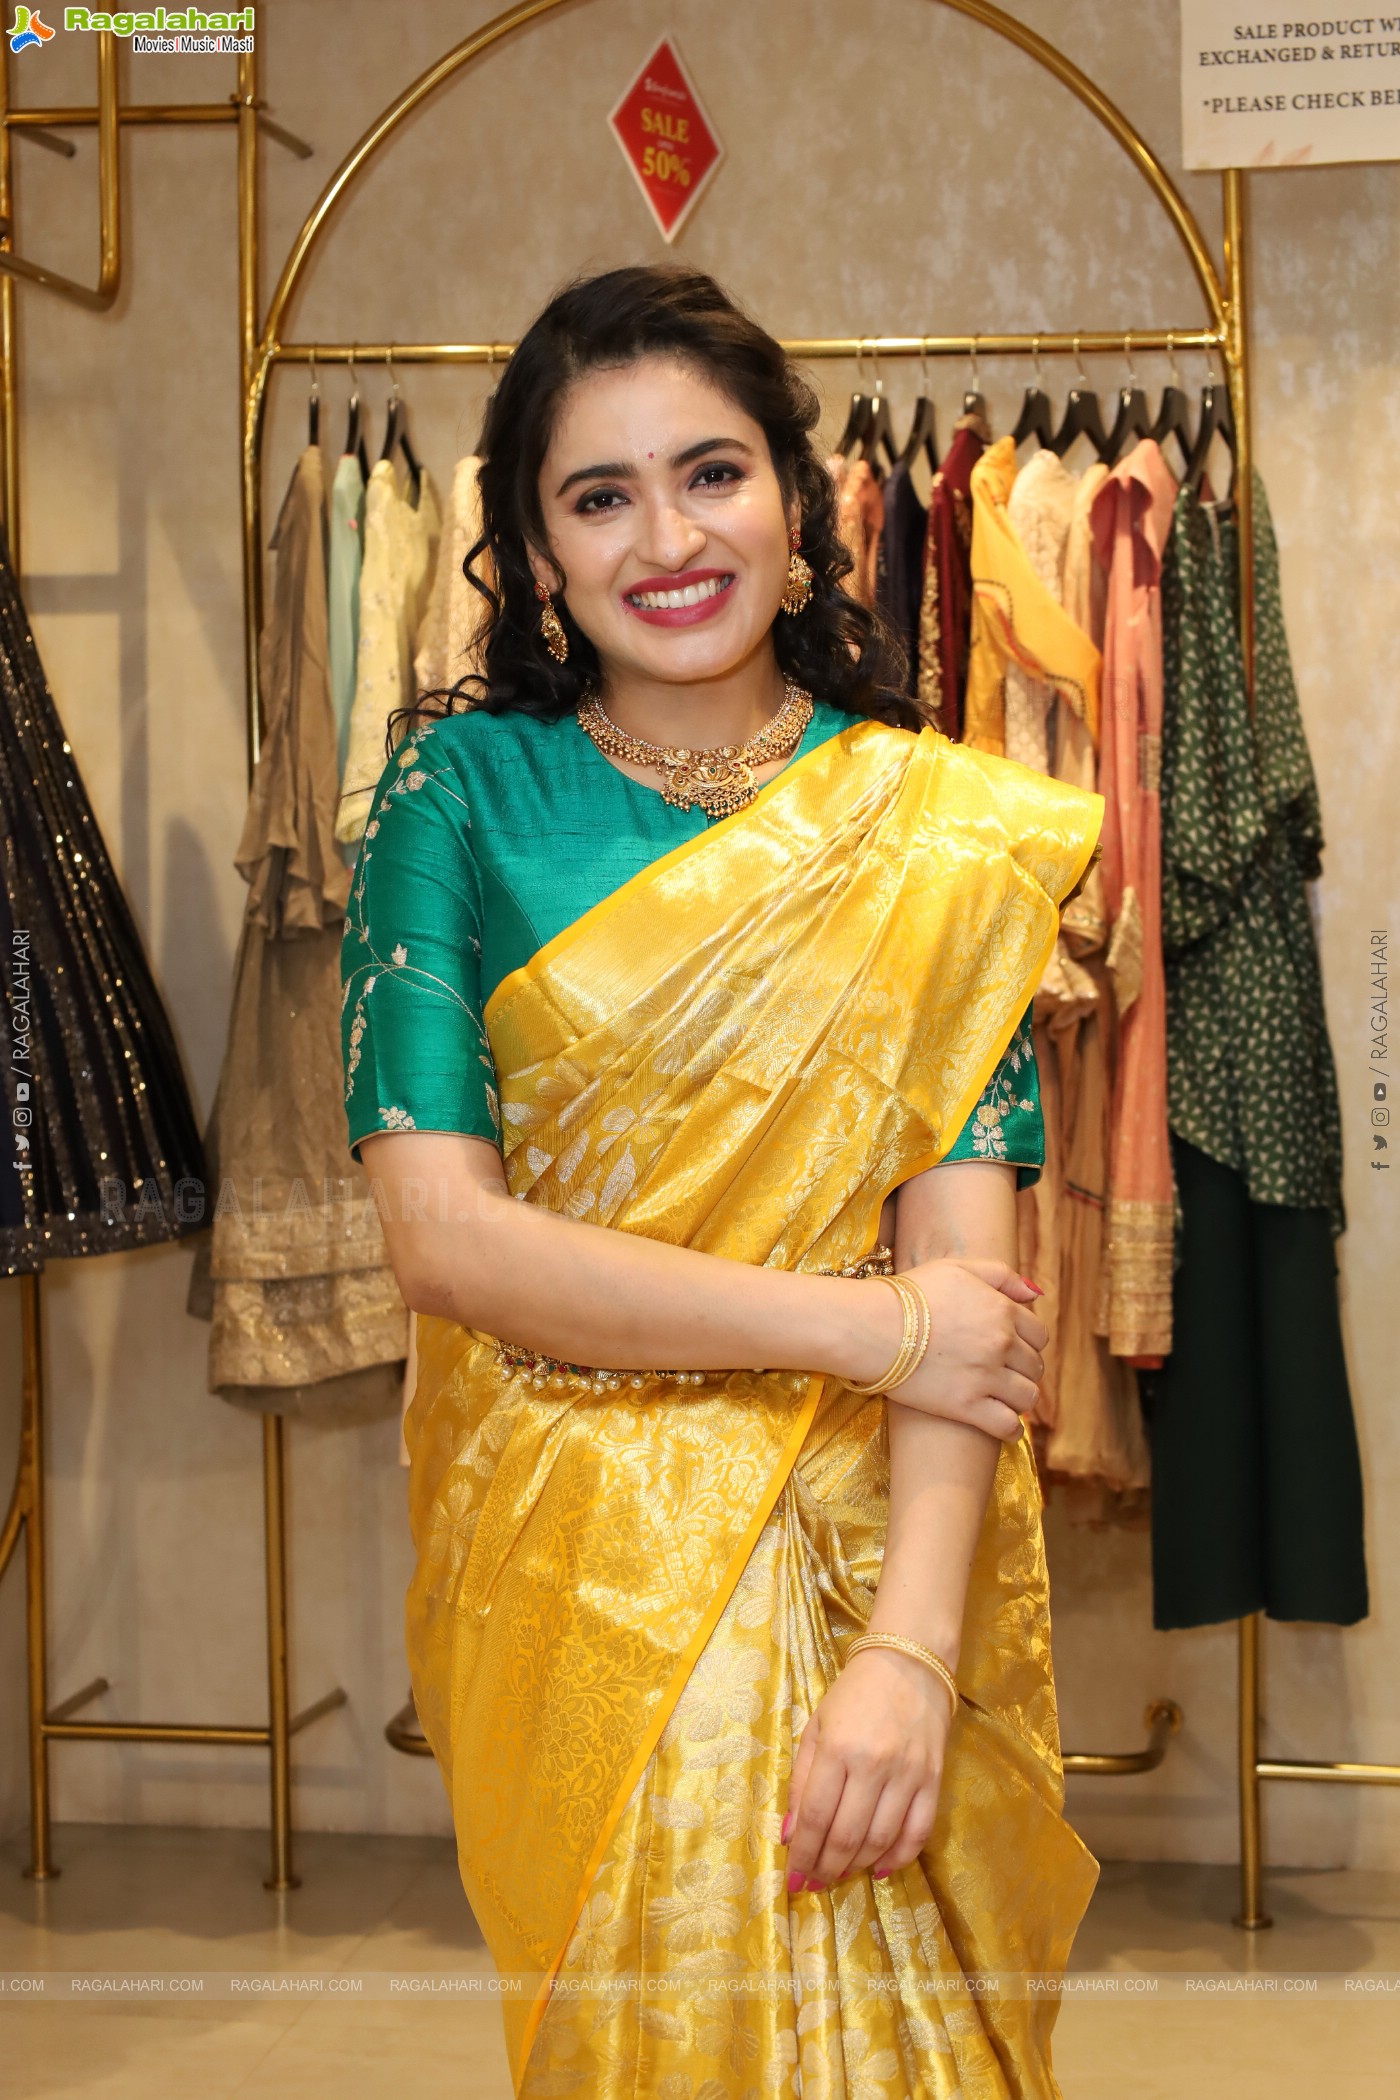 Singhania's Annual Sale at Jubilee Hills, Hyderabad